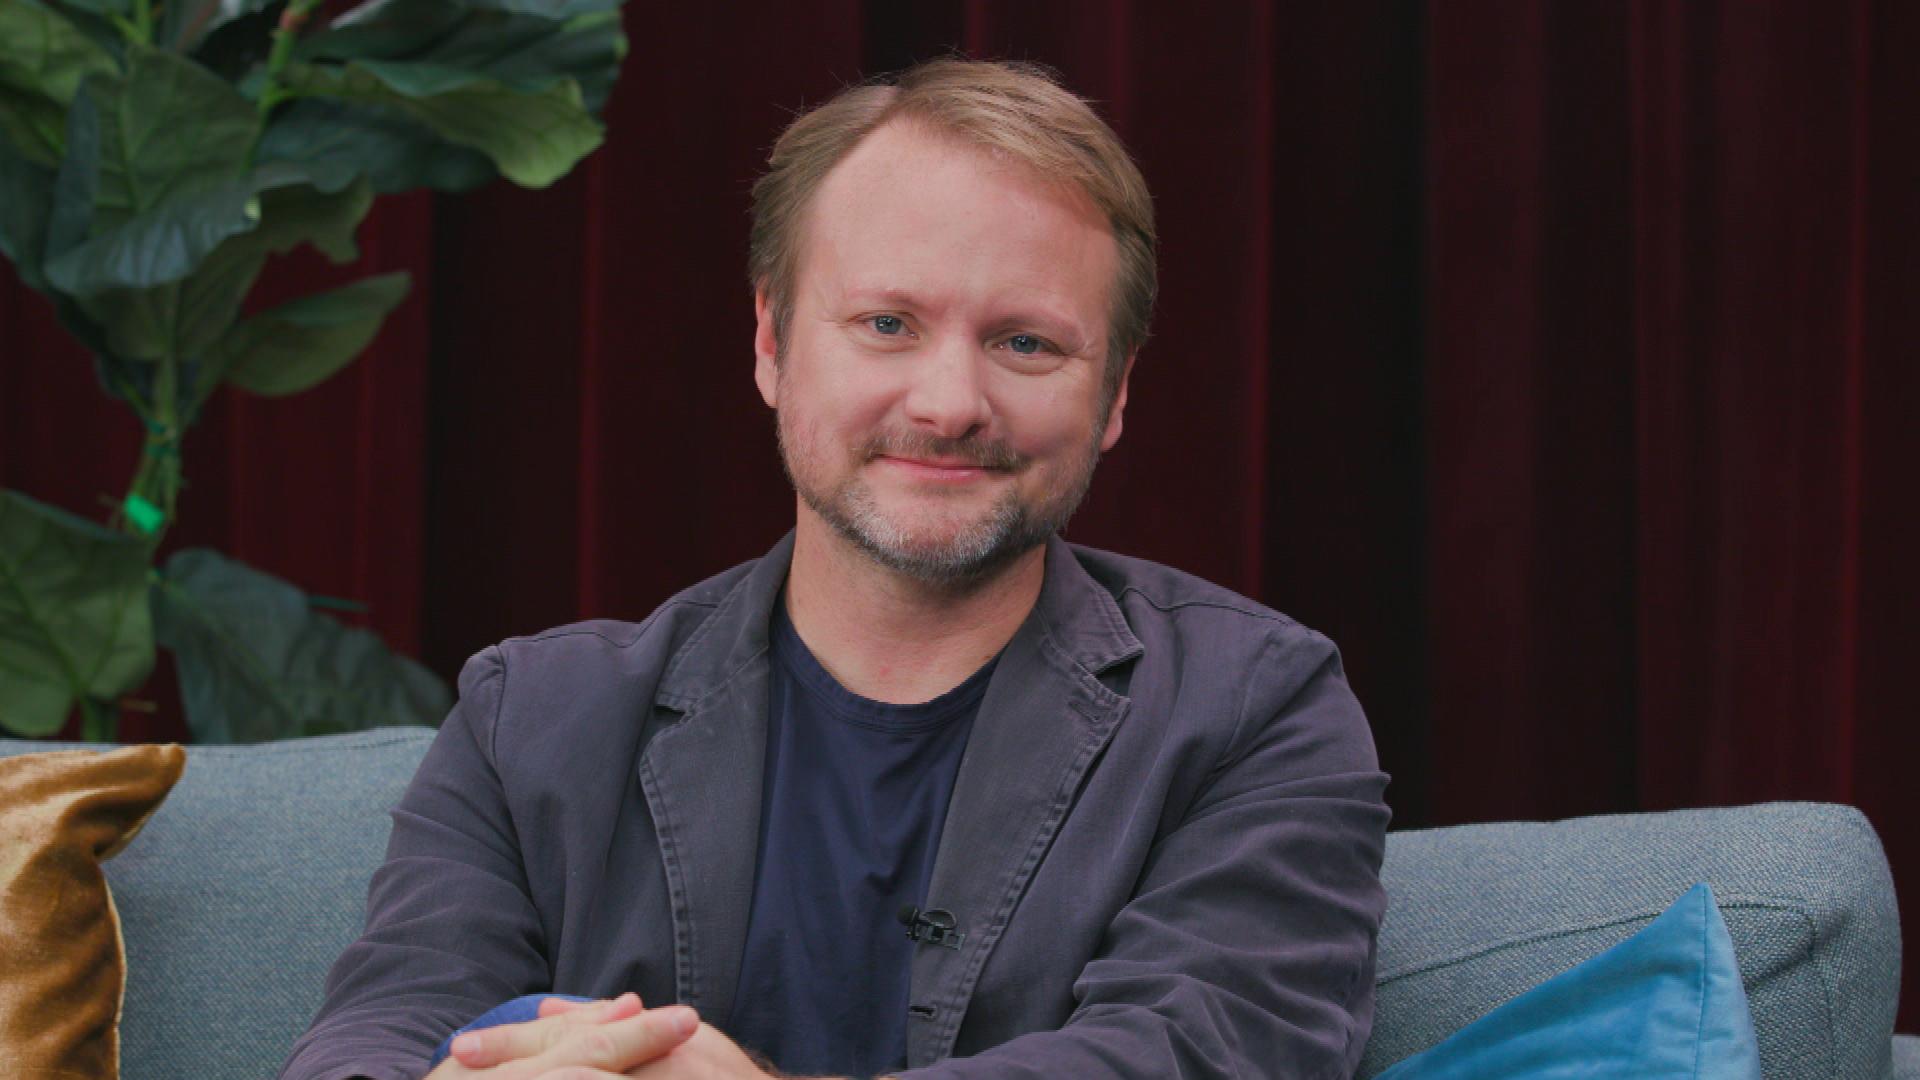 Director Rian Johnson Reveals Title for Knives Out 2